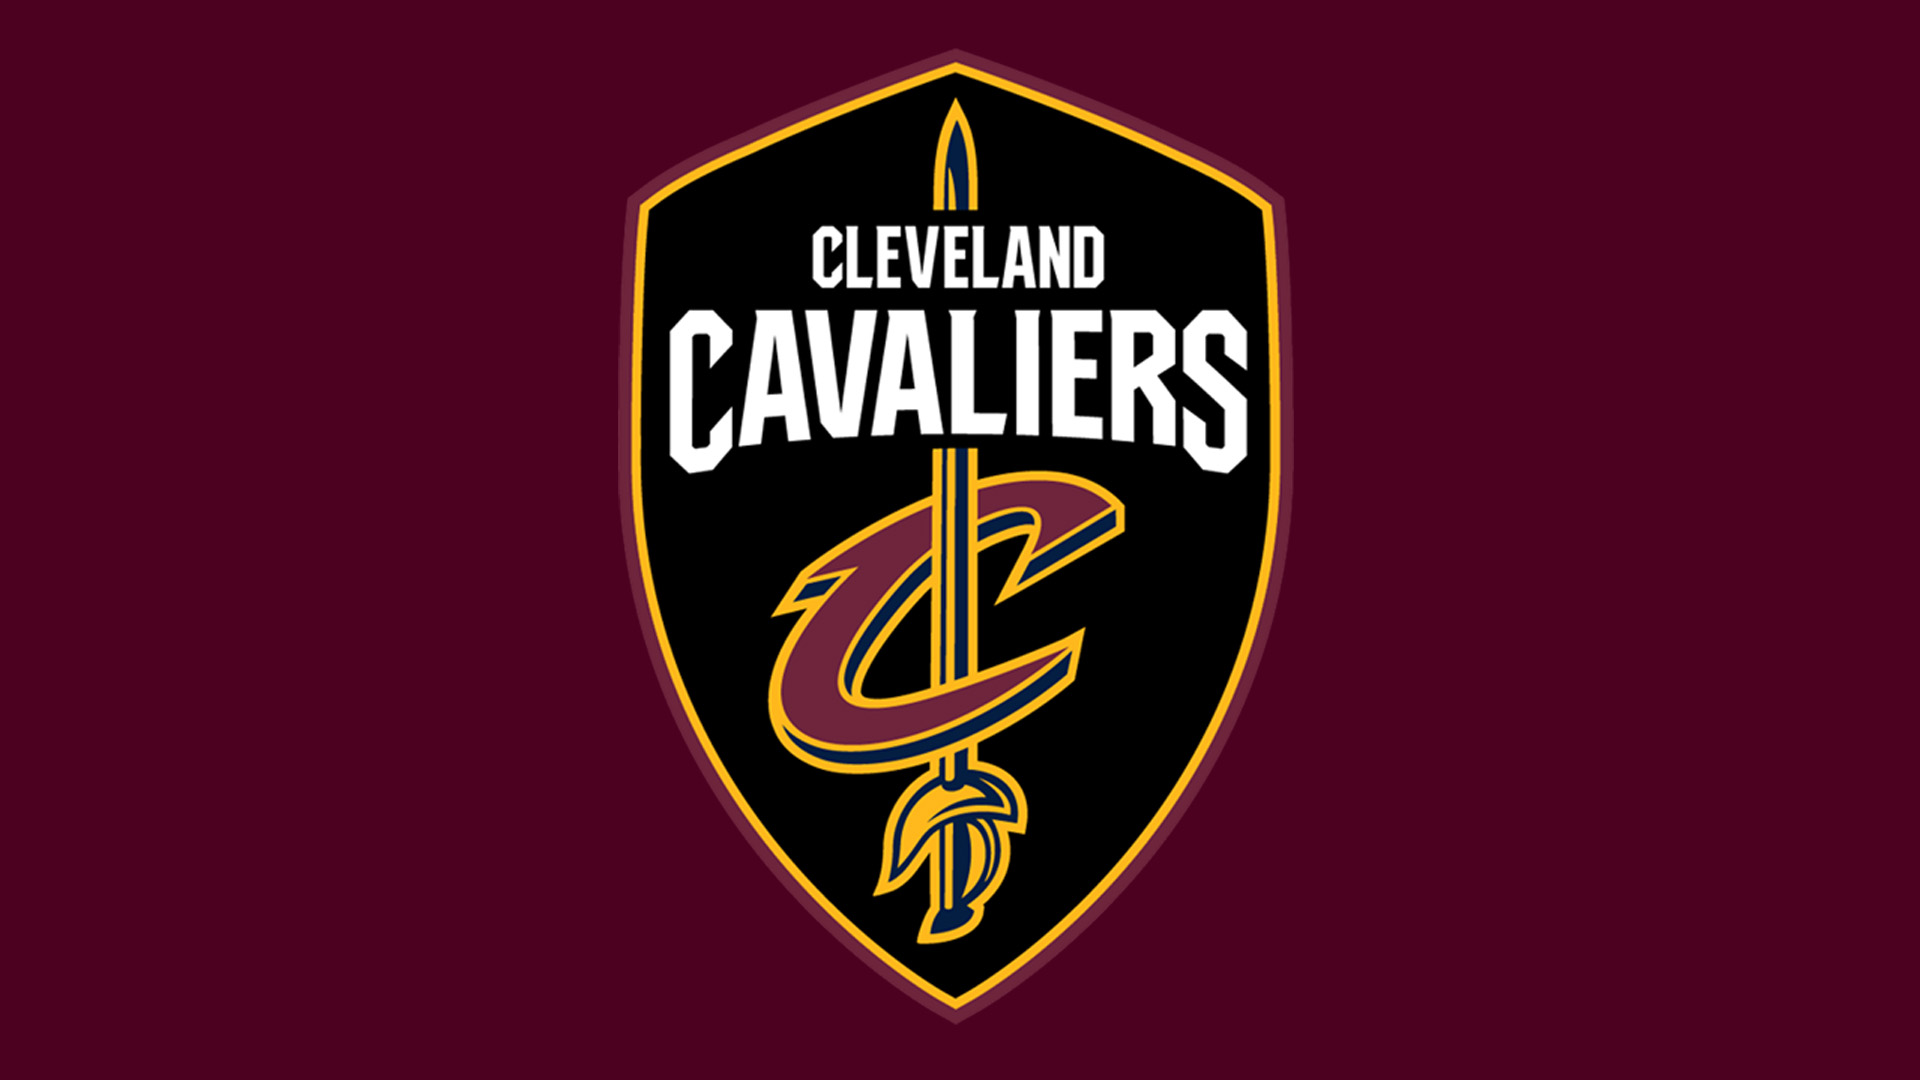 HD Cleveland Cavaliers Wallpapers 1920x1080